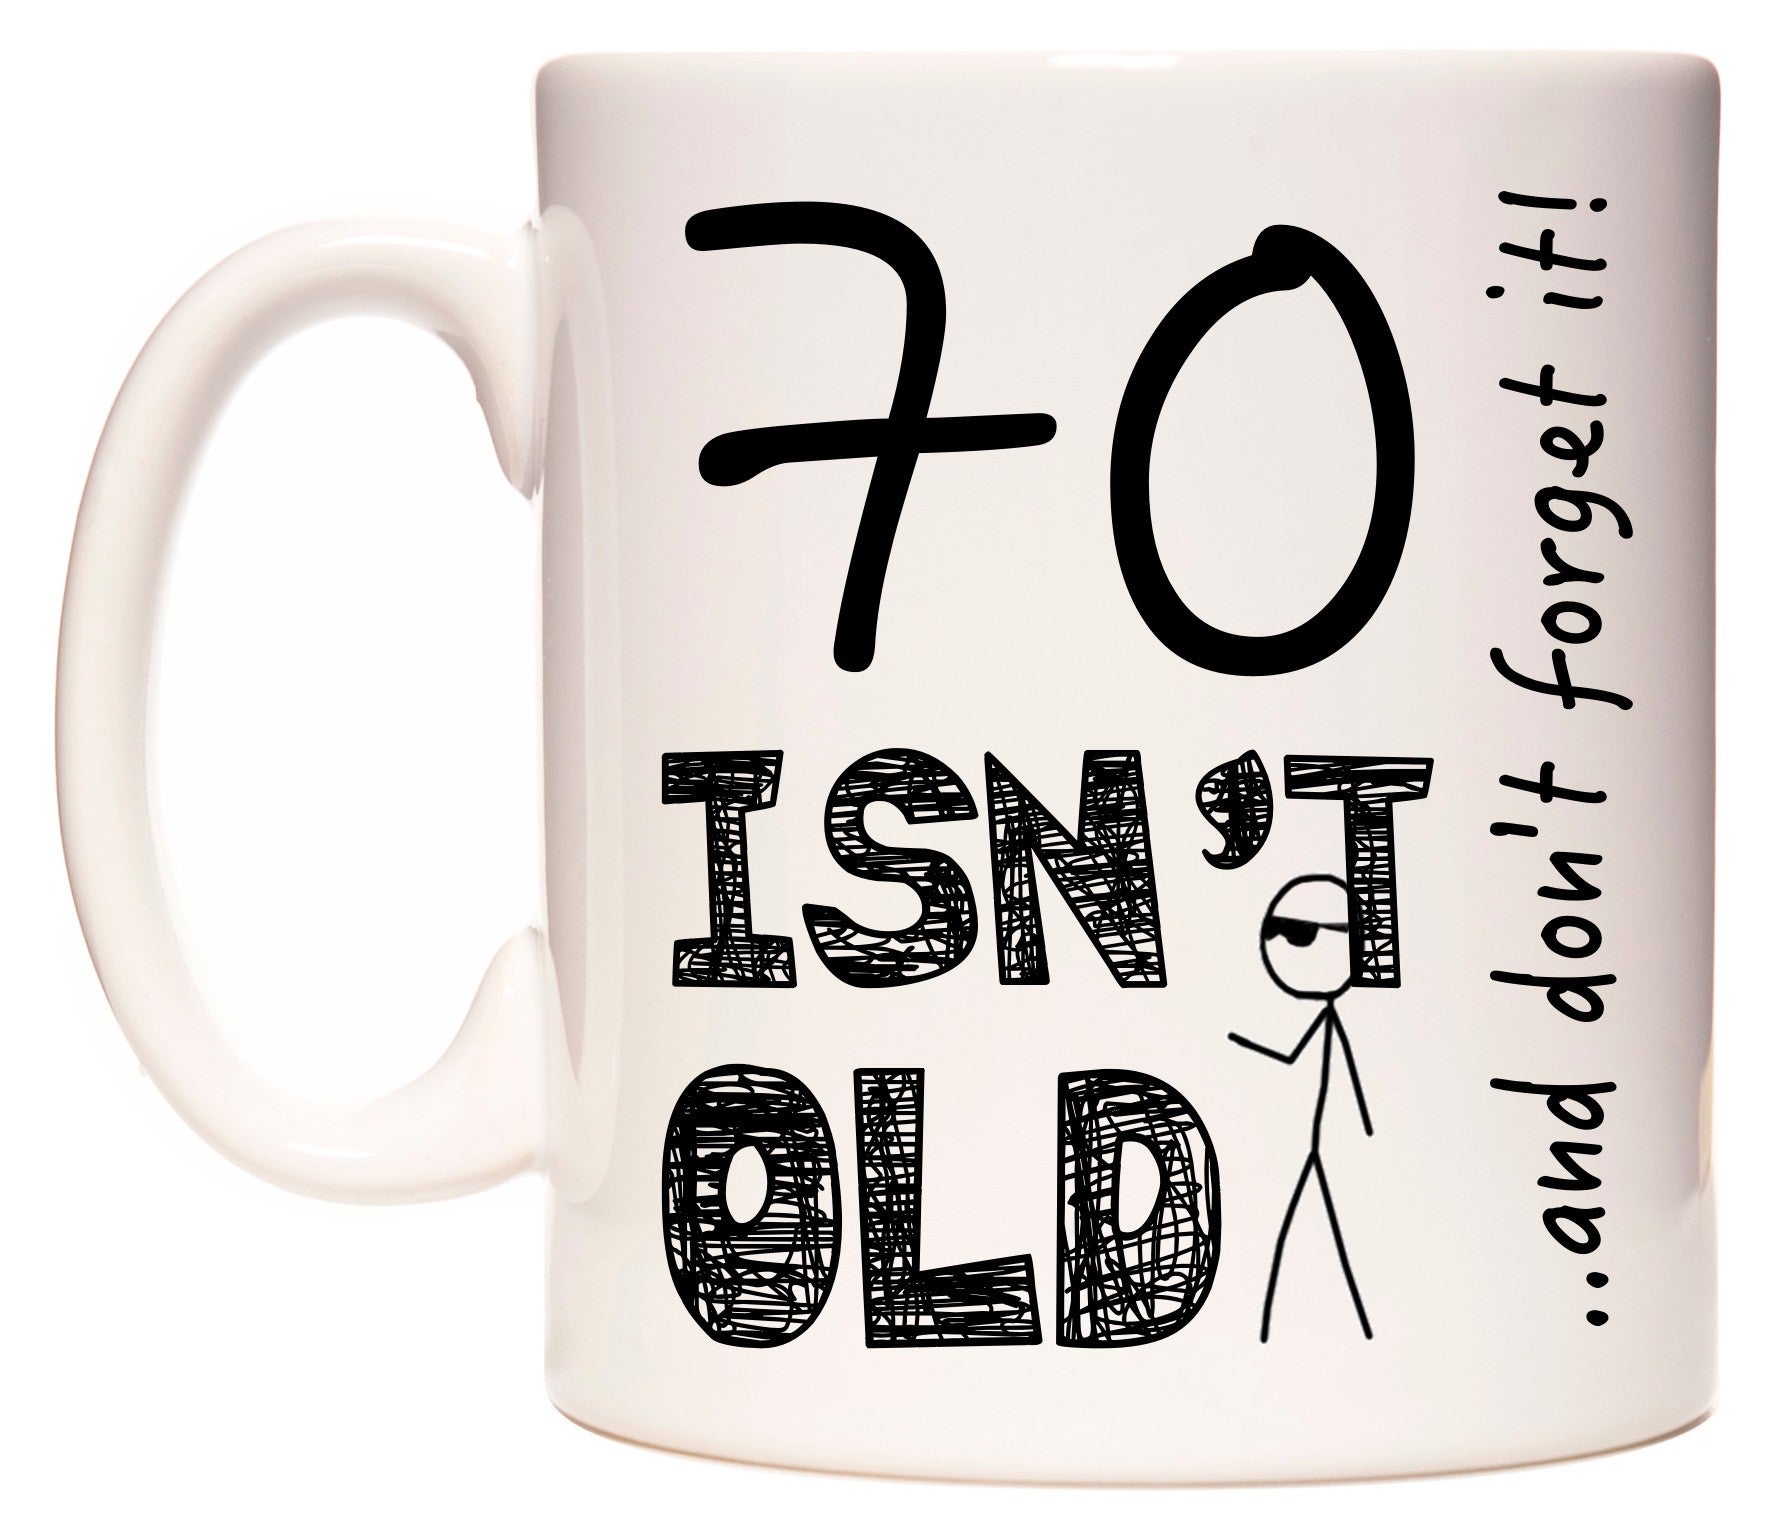 This mug features 70 Isn't Old